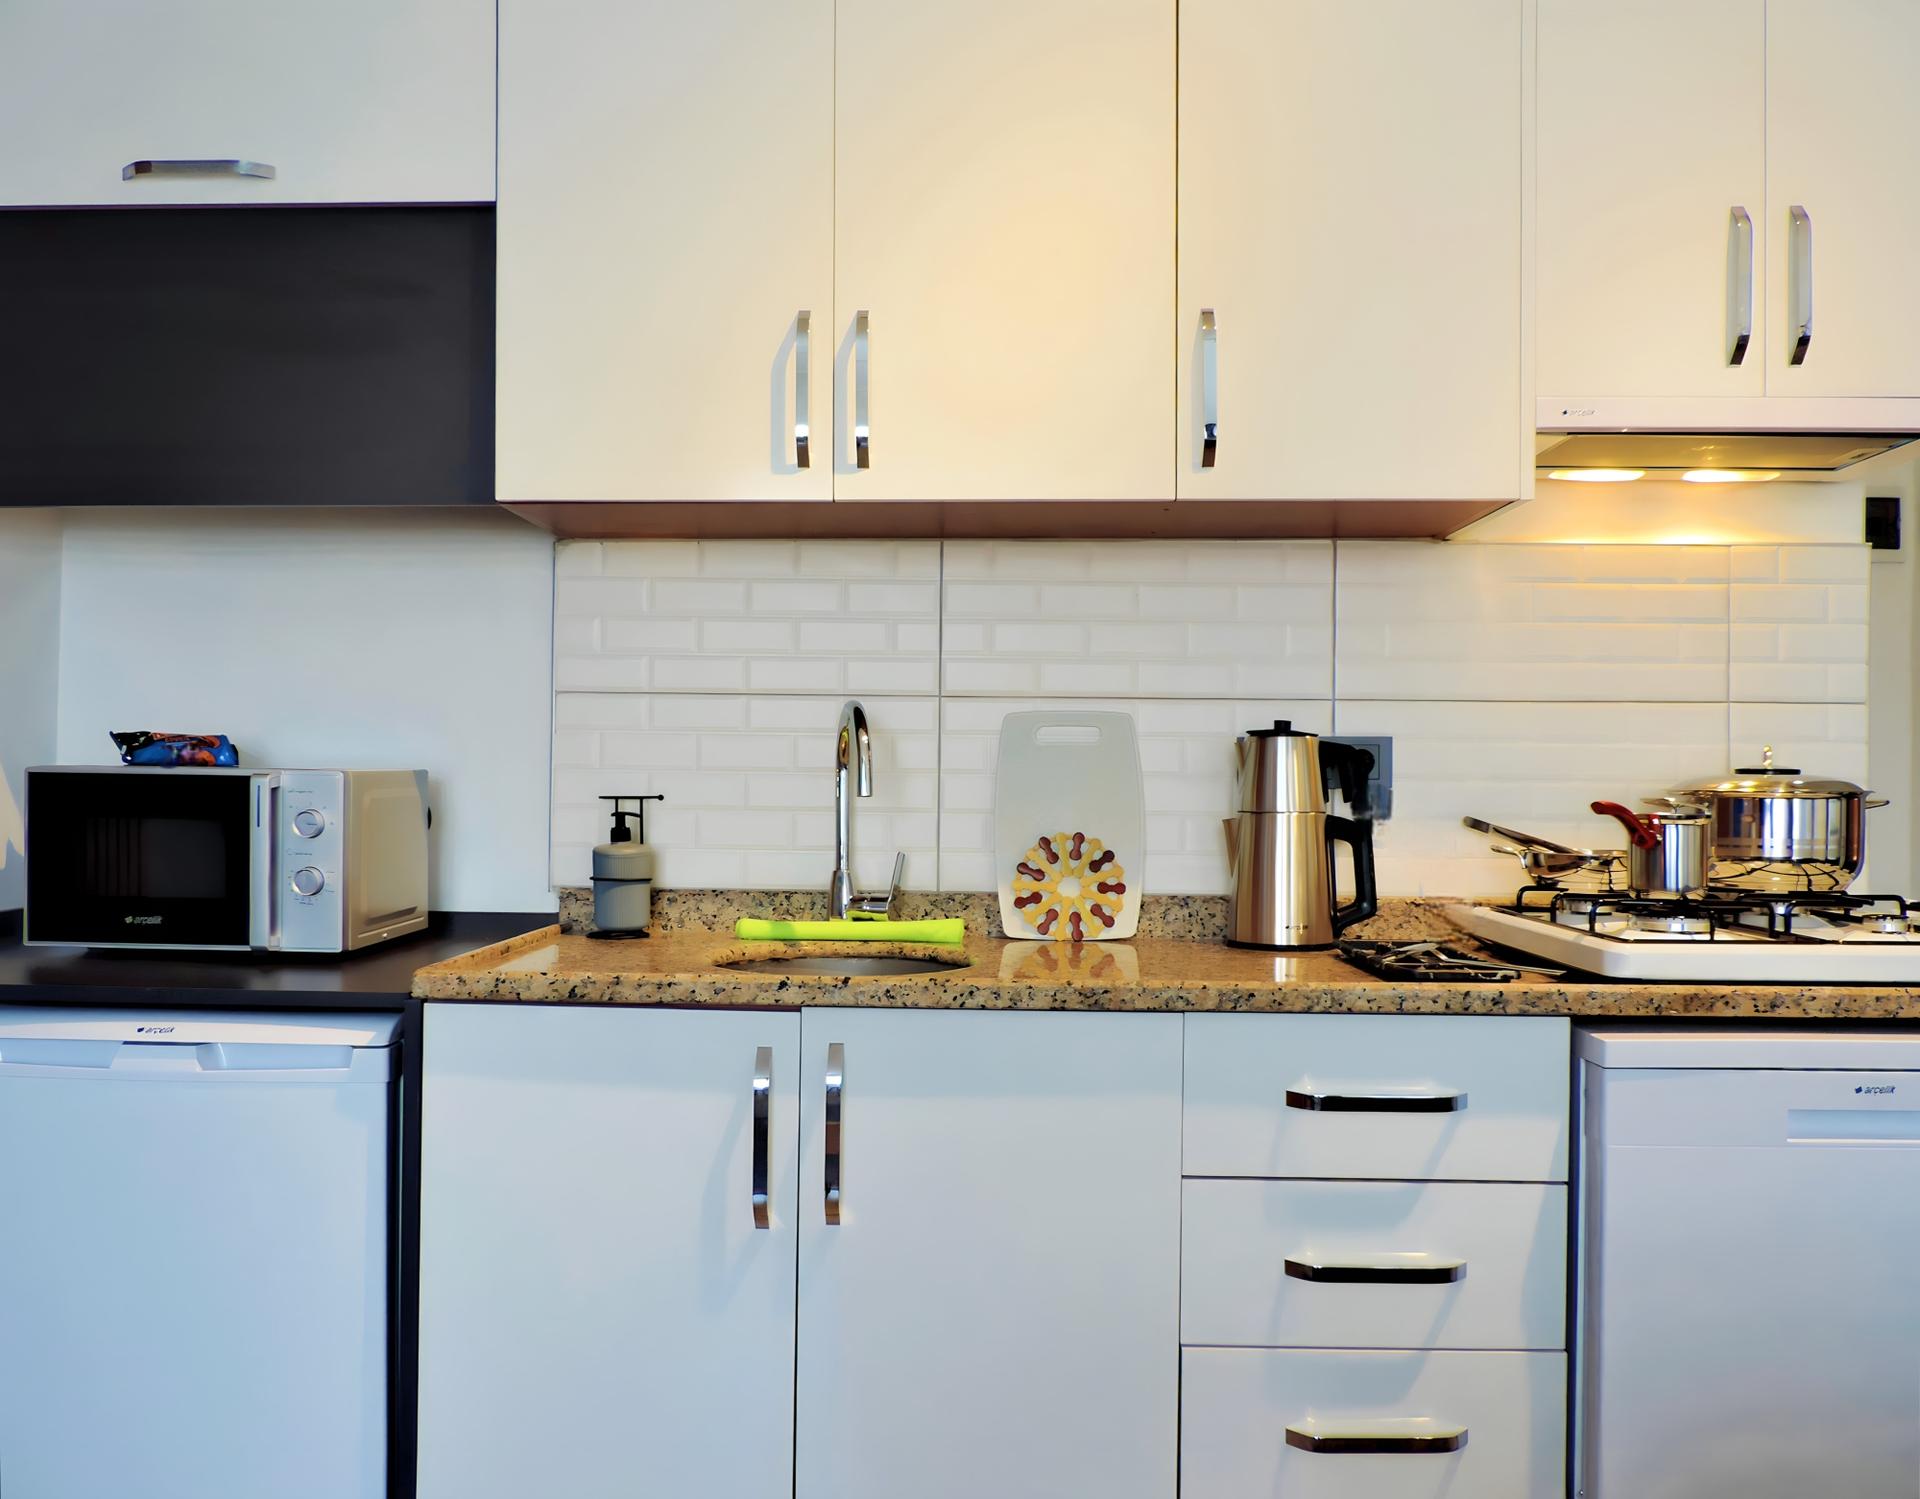 Step into our kitchen, where modern design meets practical functionality.